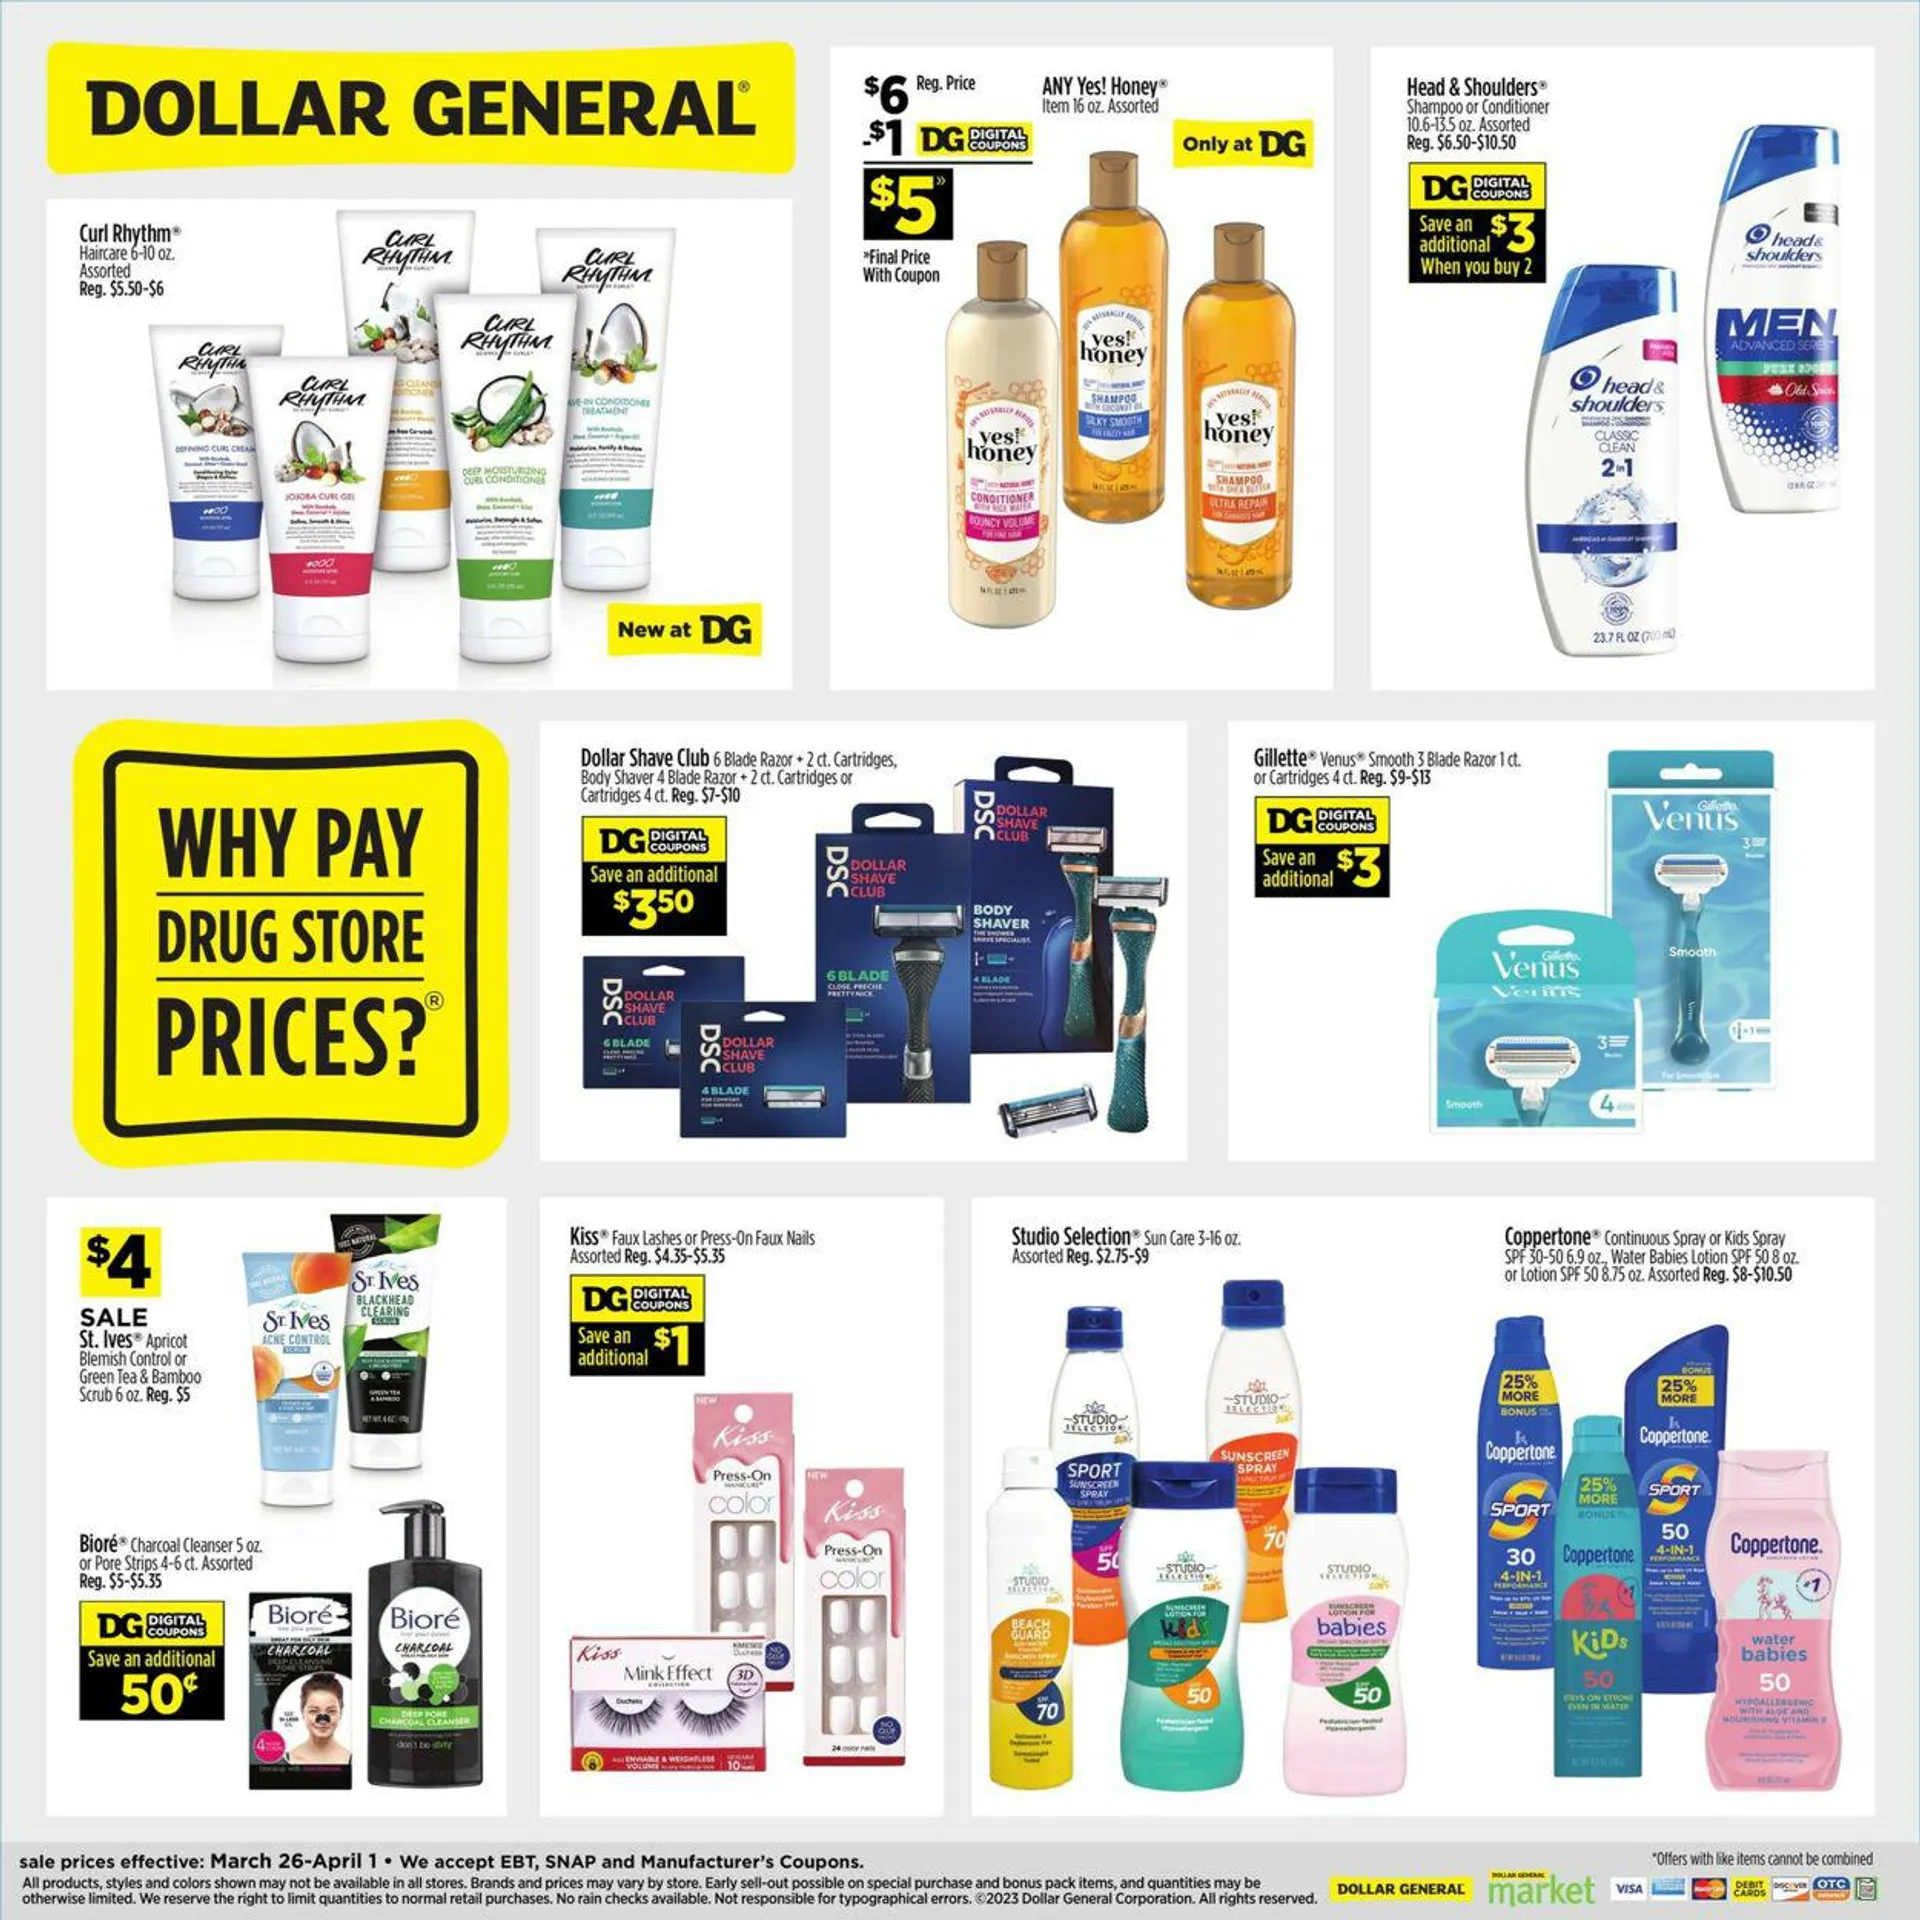 Dollar General Current weekly ad - 1